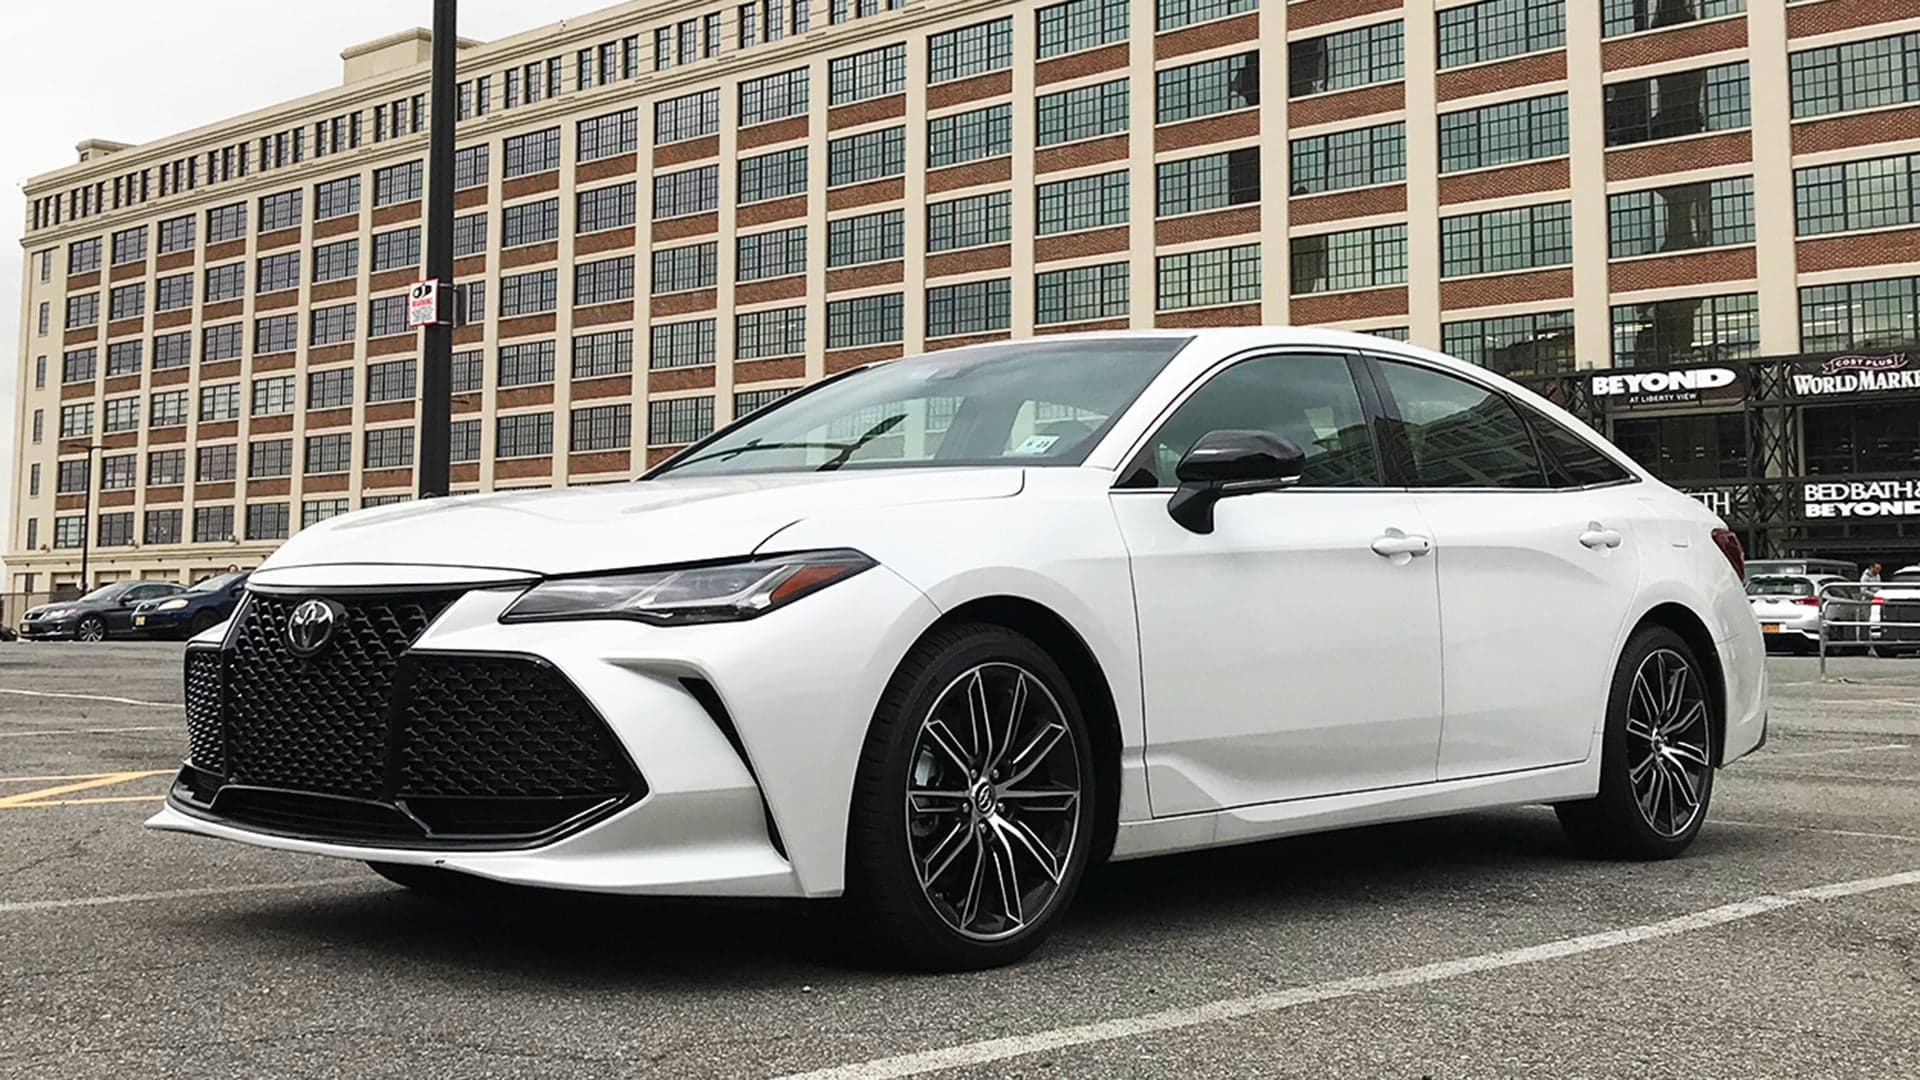 2019 Toyota Avalon Hybrid Review: A Premium Sedan With a Compact’s Thirst and Thrust